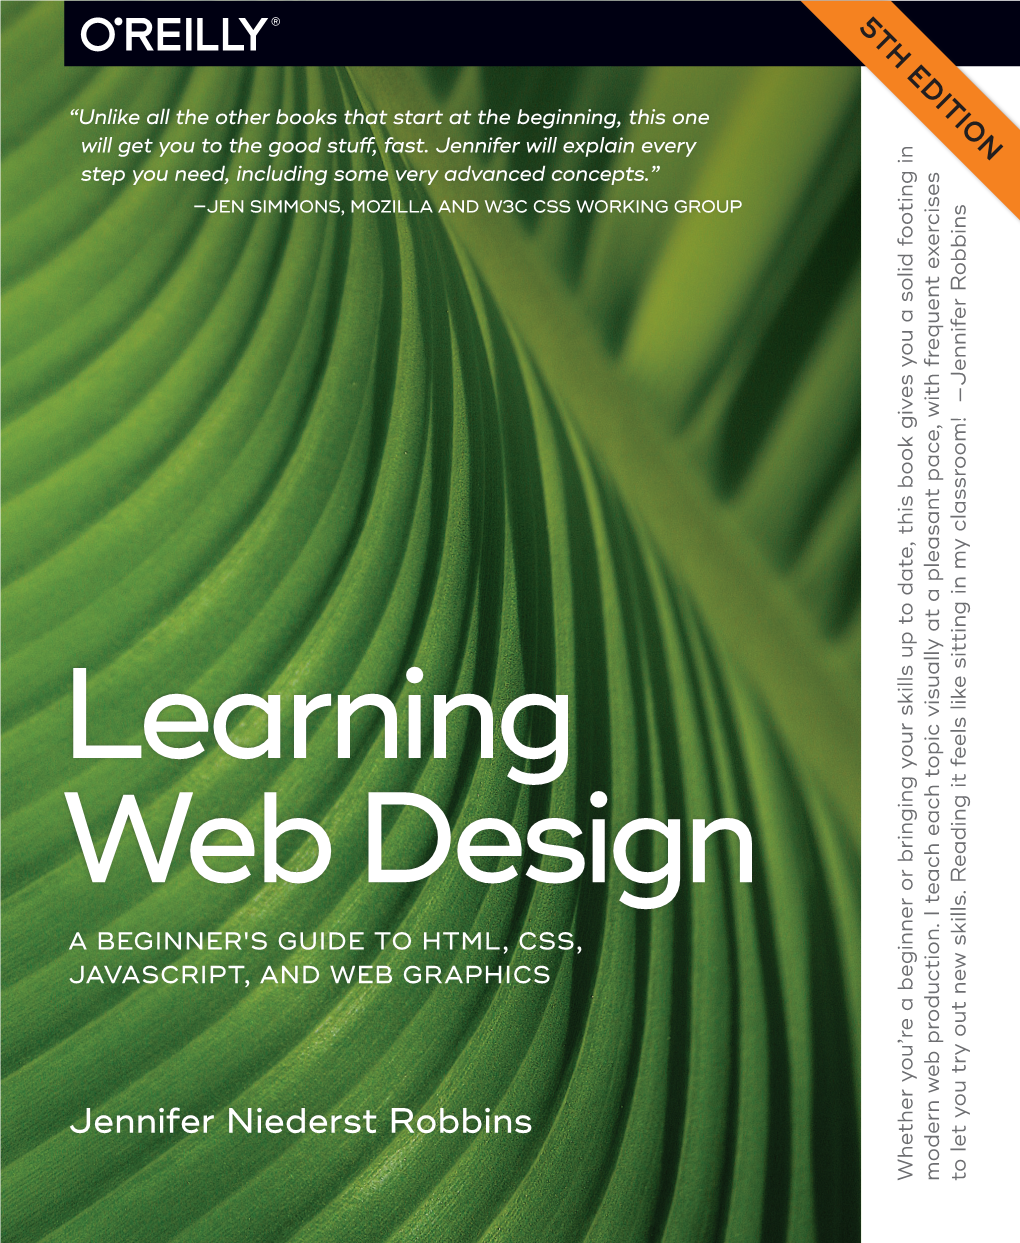 Learning Web Design, Fifth Edition a Beginner’S Guide to HTML, CSS, Javascript, and Web Graphics by Jennifer Niederst Robbins